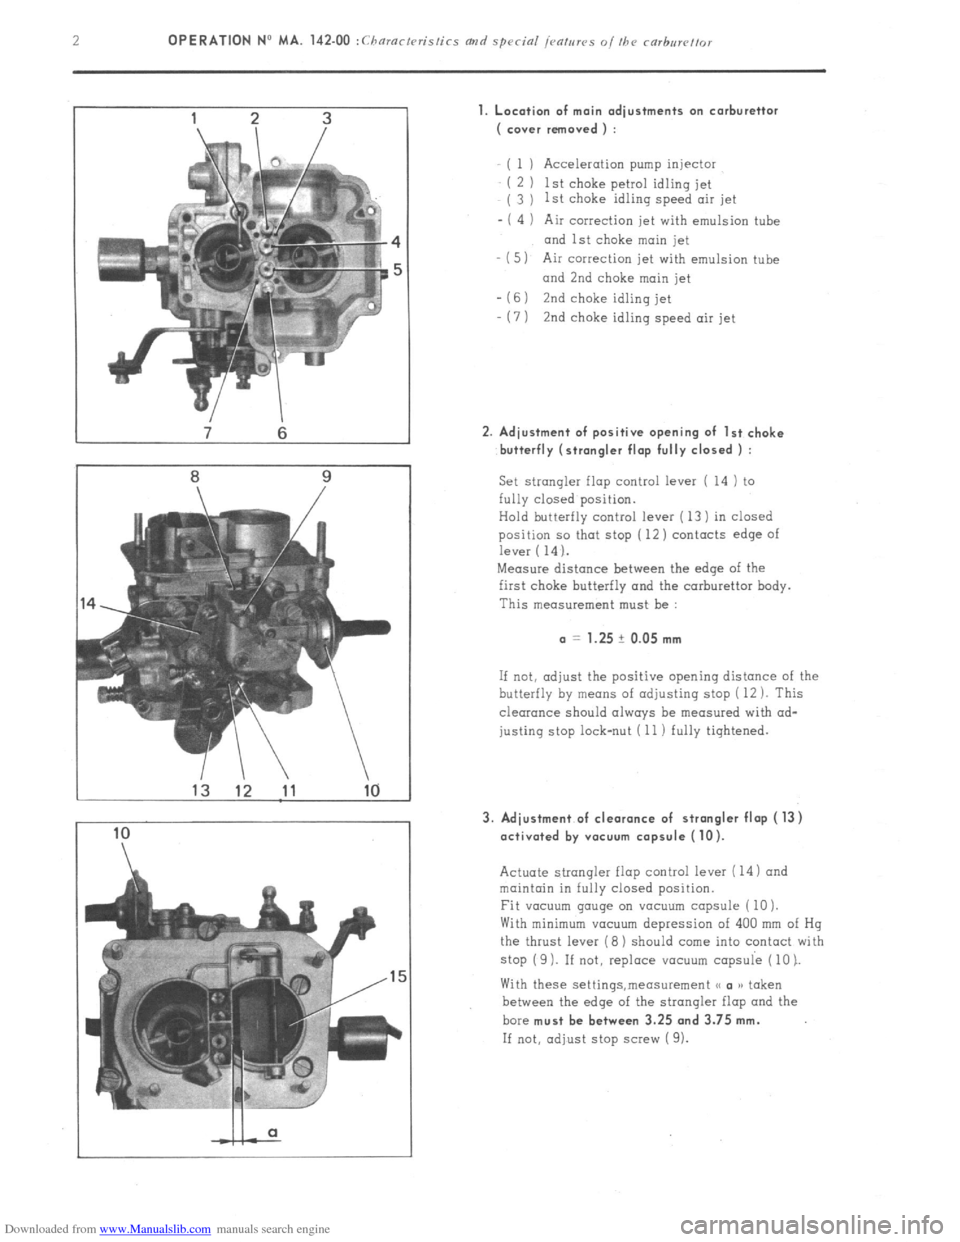 Citroen CX 1981 1.G User Guide Downloaded from www.Manualslib.com manuals search engine 2 OPERATION No MA. 142-00 :Cbaracteris/ics and special j~,attlr~s o/the carhrrre~~or 
7 6 
8 9 
1 ) Acceleration pump injector 
2 ) 1st choke p